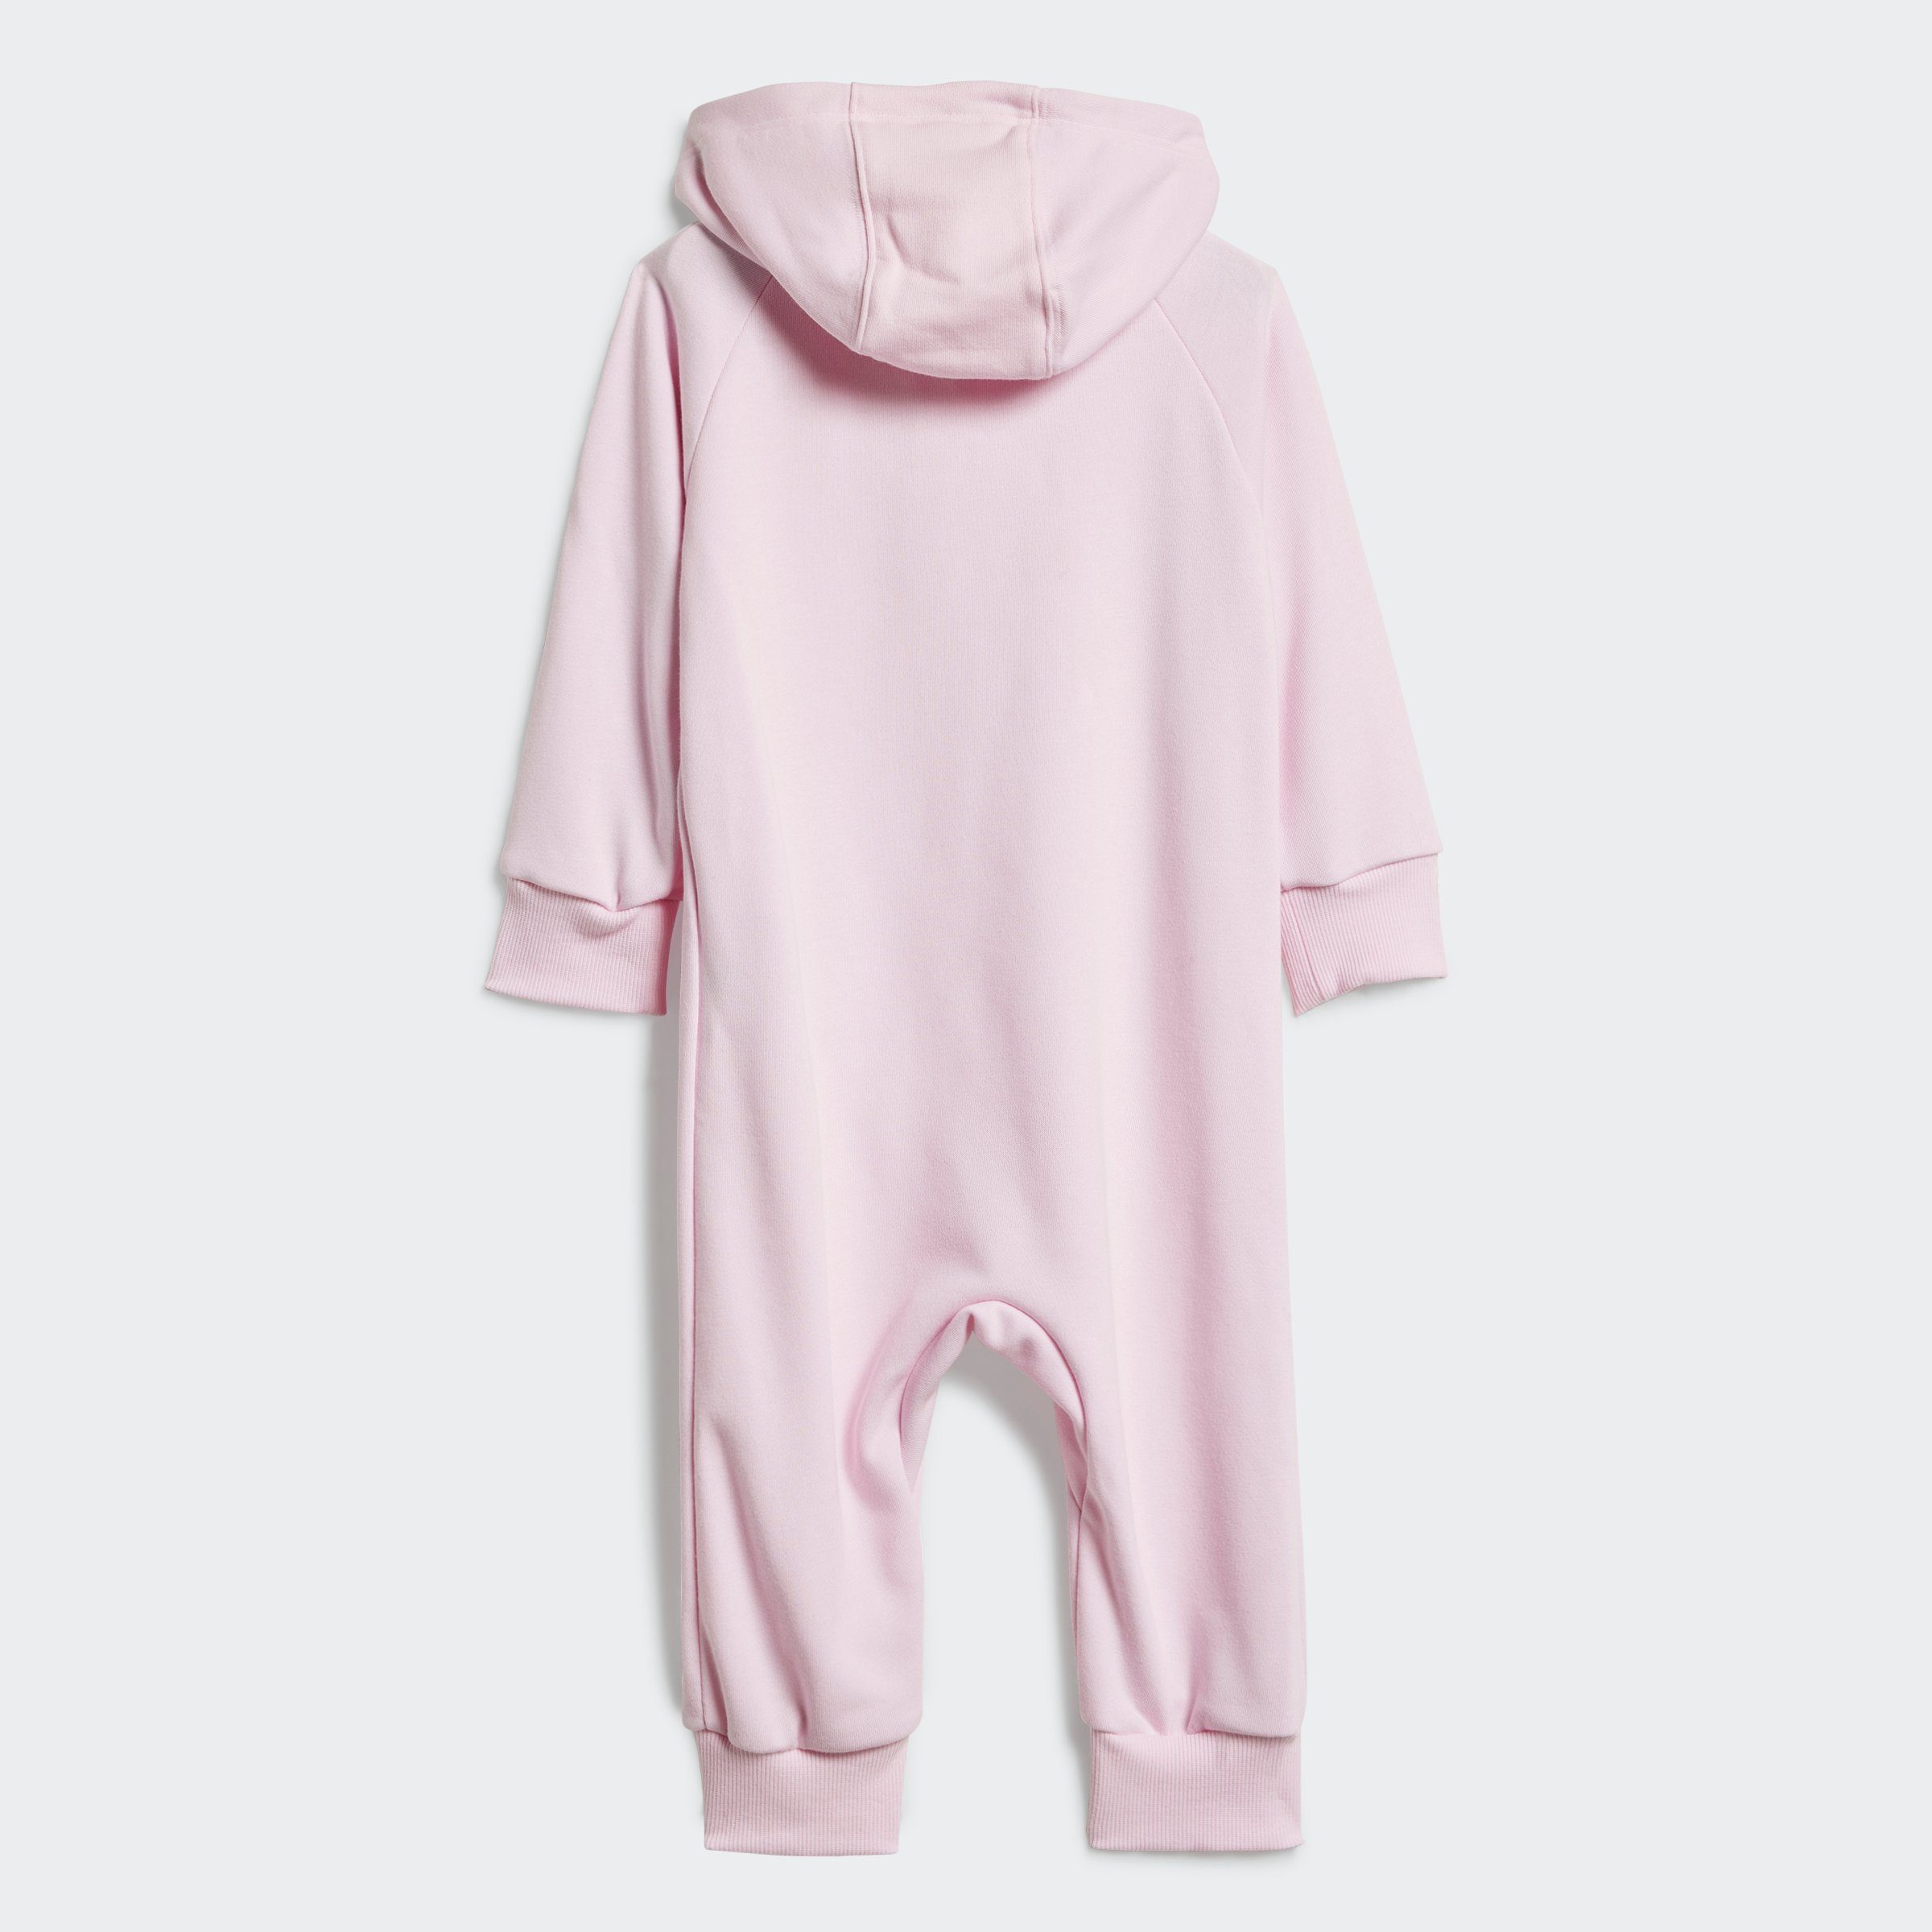 ONESIE White / Overall 3S Sportswear Clear adidas FT I Pink